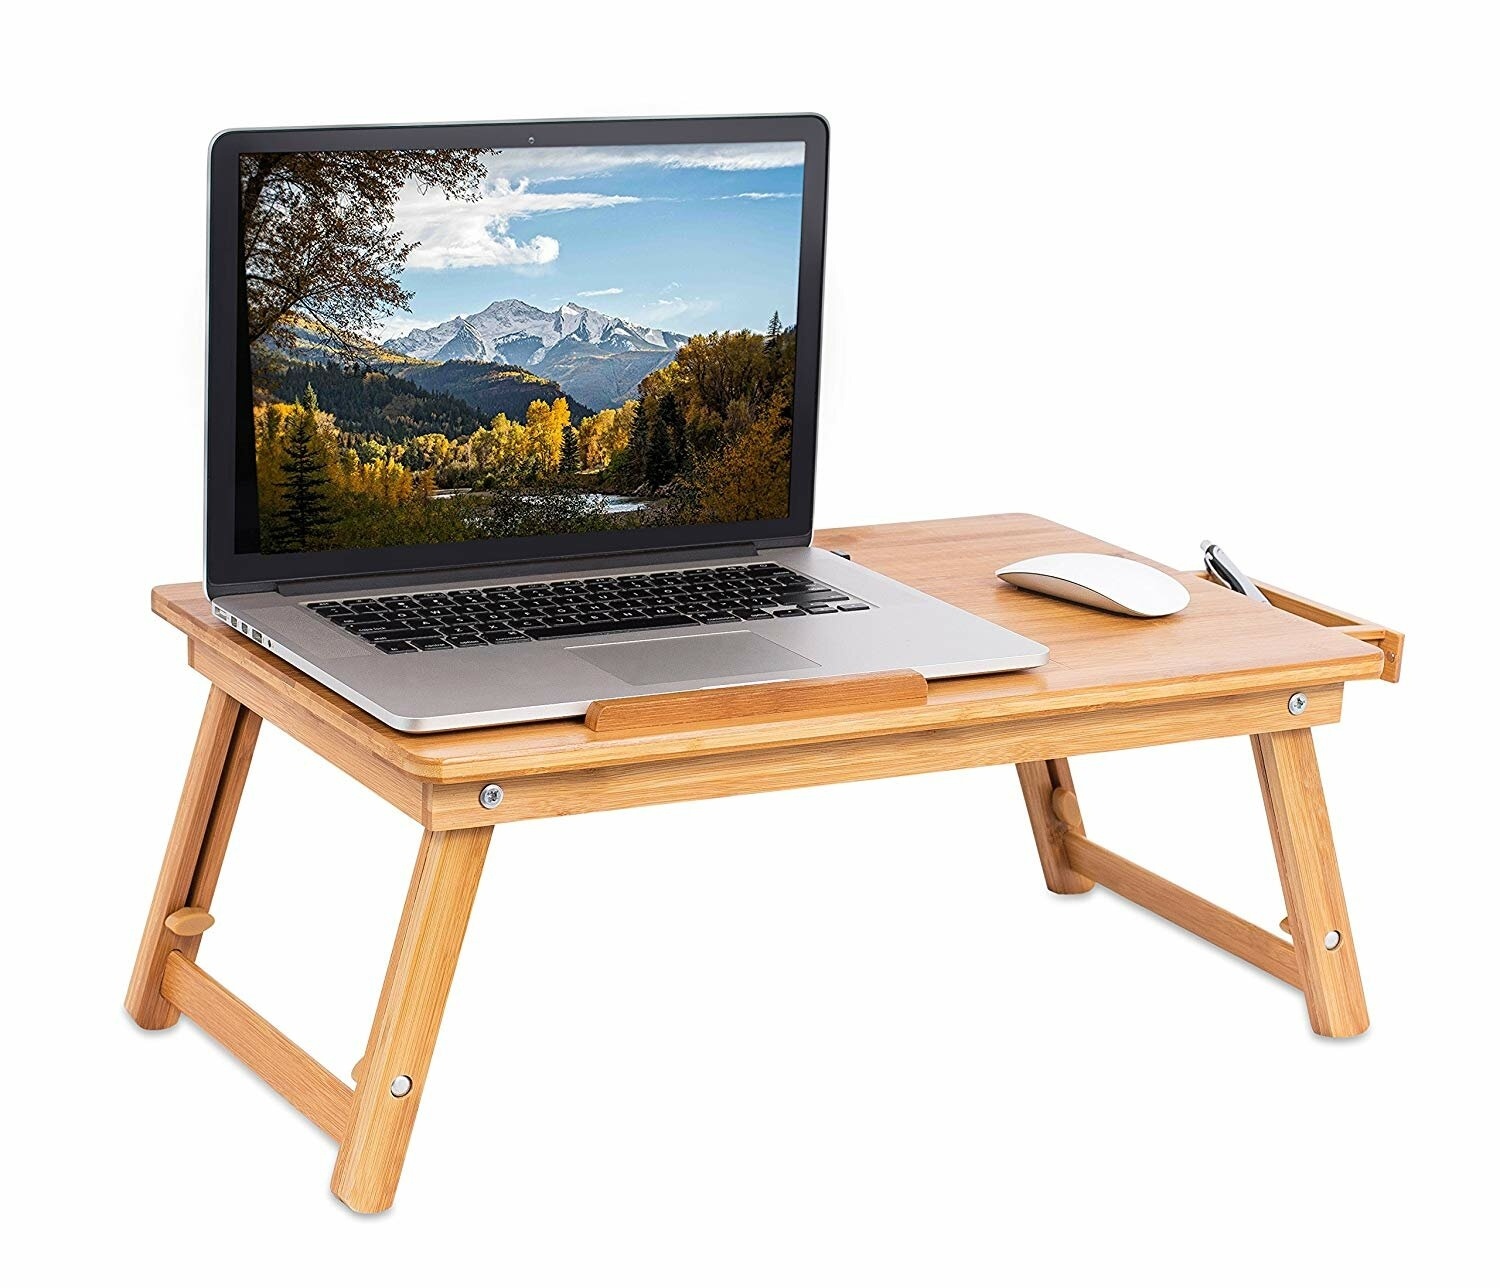 https://visualhunt.com/photos/23/sofia-sam-laptop-lap-tray-with-adjustable-legs-bamboo-foldable-breakfast-serving-bed-tray-lap-desk-with-tilting-top-and-side-drawer-laptop-stand-natural.jpg